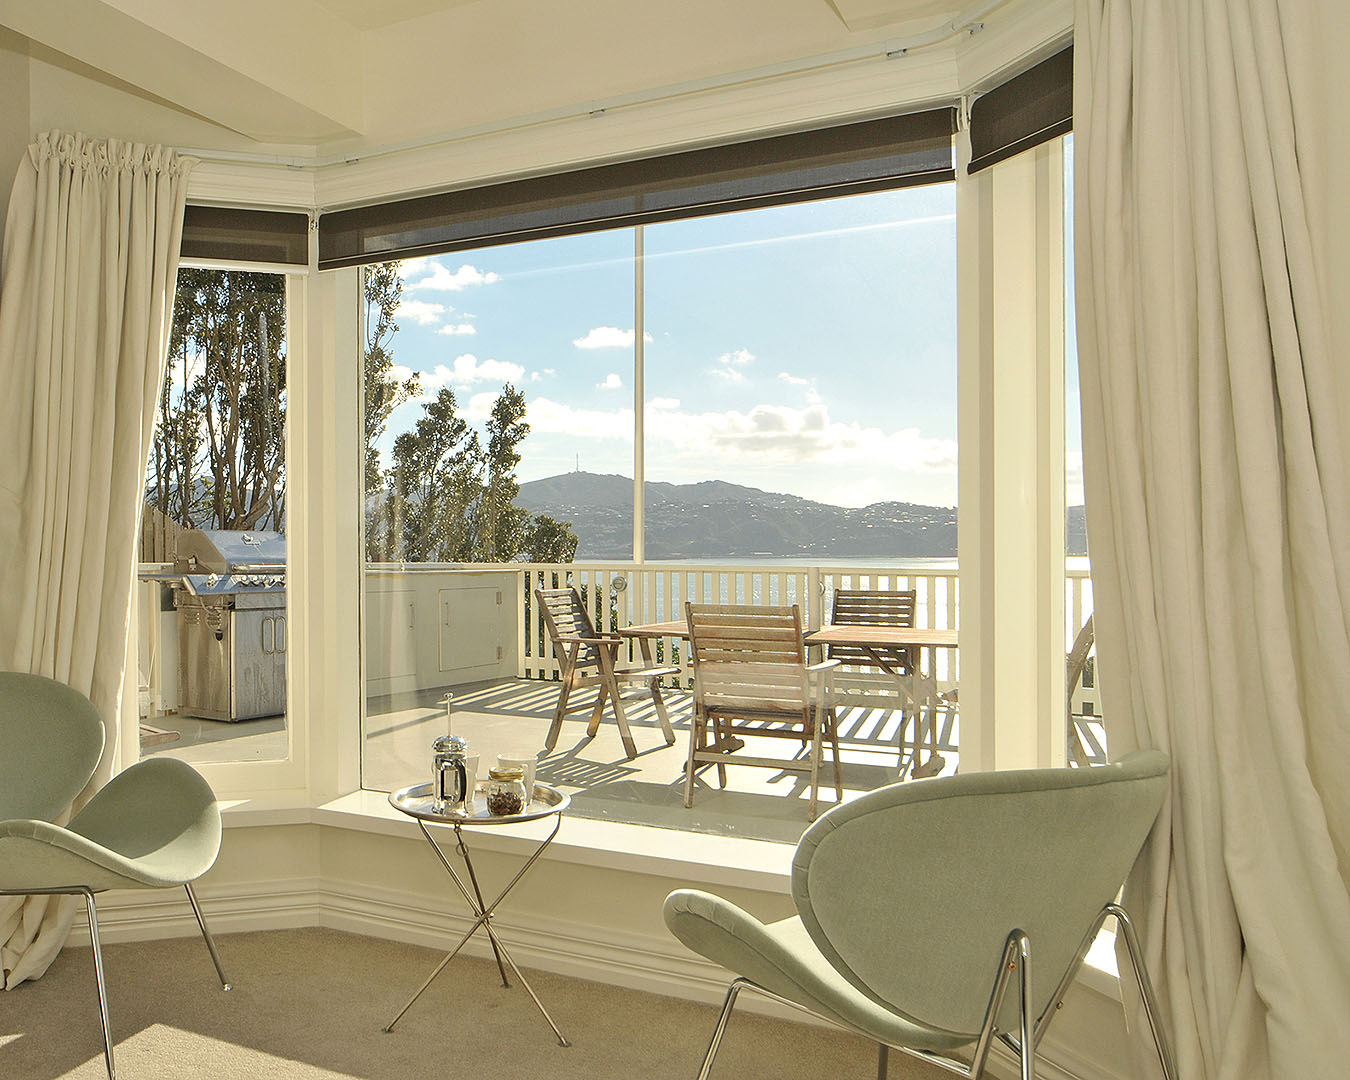 One of the best Airbnbs in Wellington, the expansive balcony at Crescent Studio boasts an outdoor dining set up and sweeping ocean views.